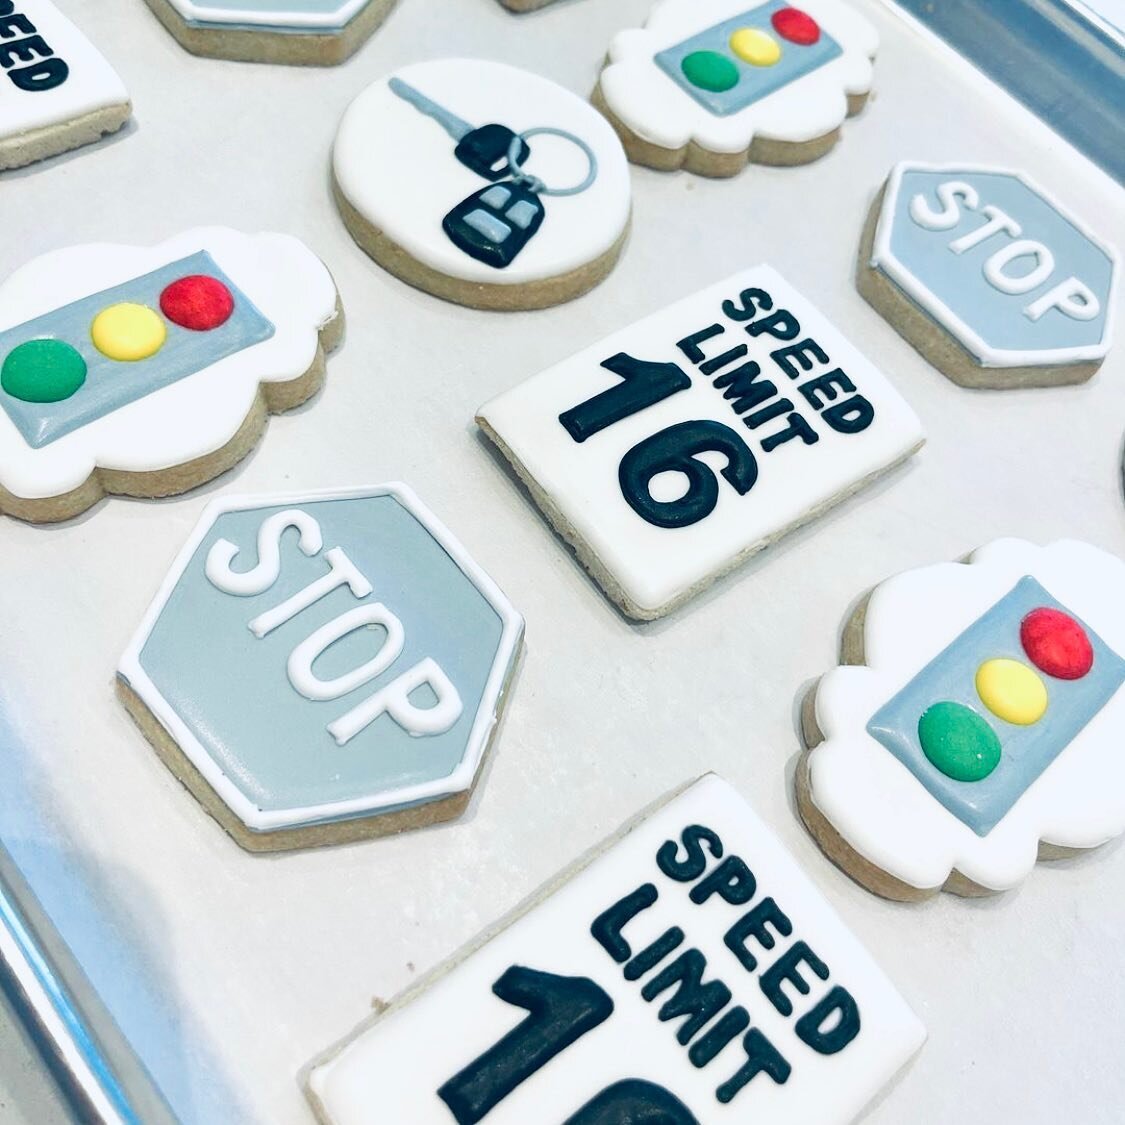 Looking for a sweet mid-week treat to brighten up your Wednesday? Stop by @sugarcoated_hp! They specialize in artisan cakes, cookies, DIY kits, custom treats, and more! 🍪🧁

#sugarcoated #bakery #cake #cookie #cookies #customcookie #customcookies #c